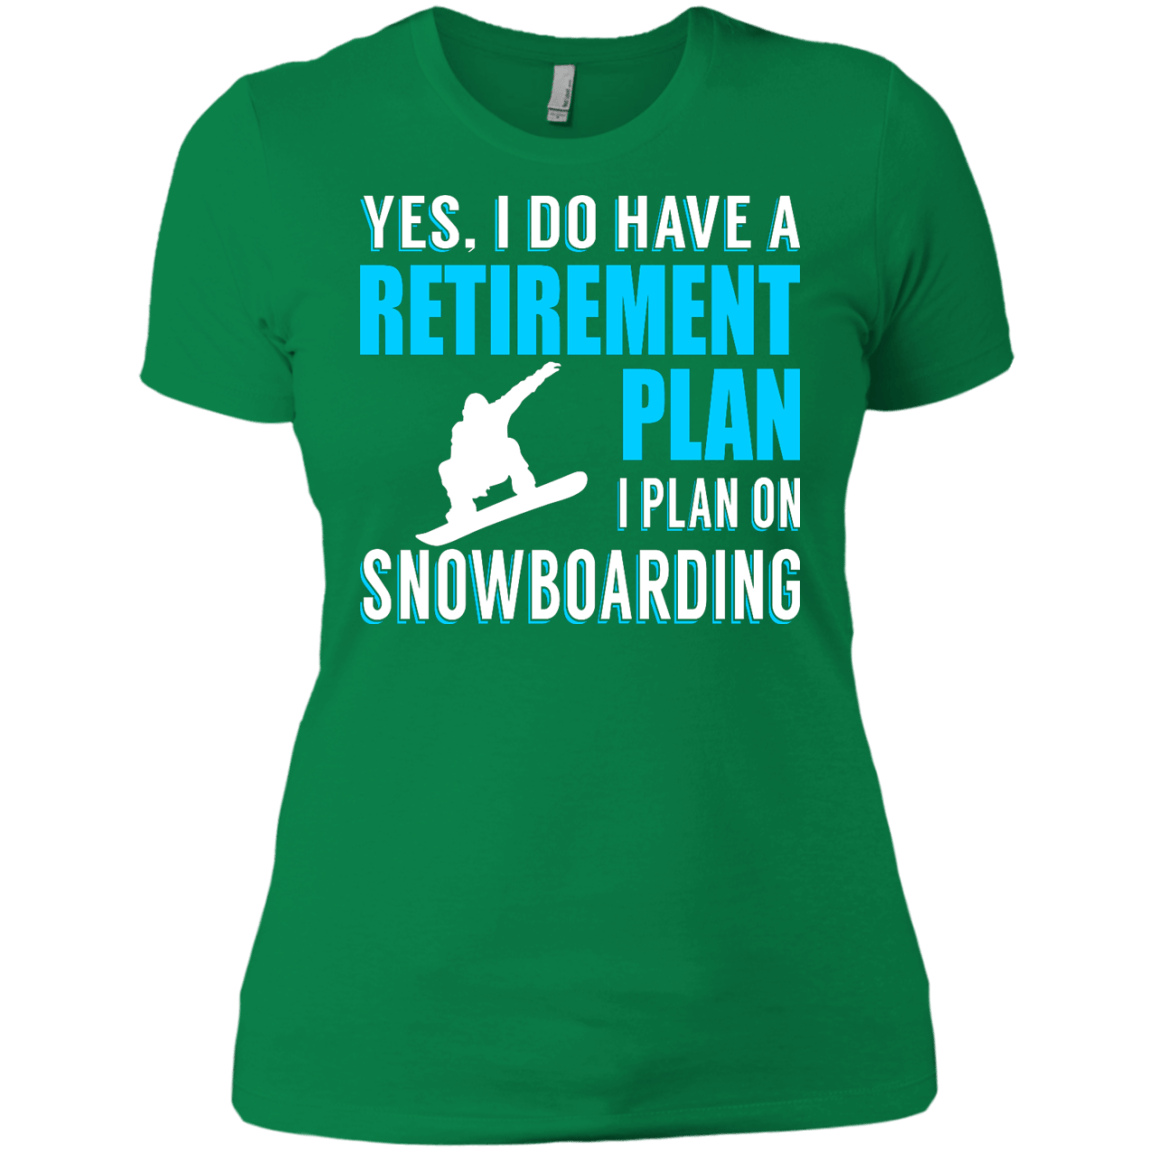 Yes, I Do Have A Retirement Plan - I Plan On Snowboarding Ladies Tees - Powderaddicts